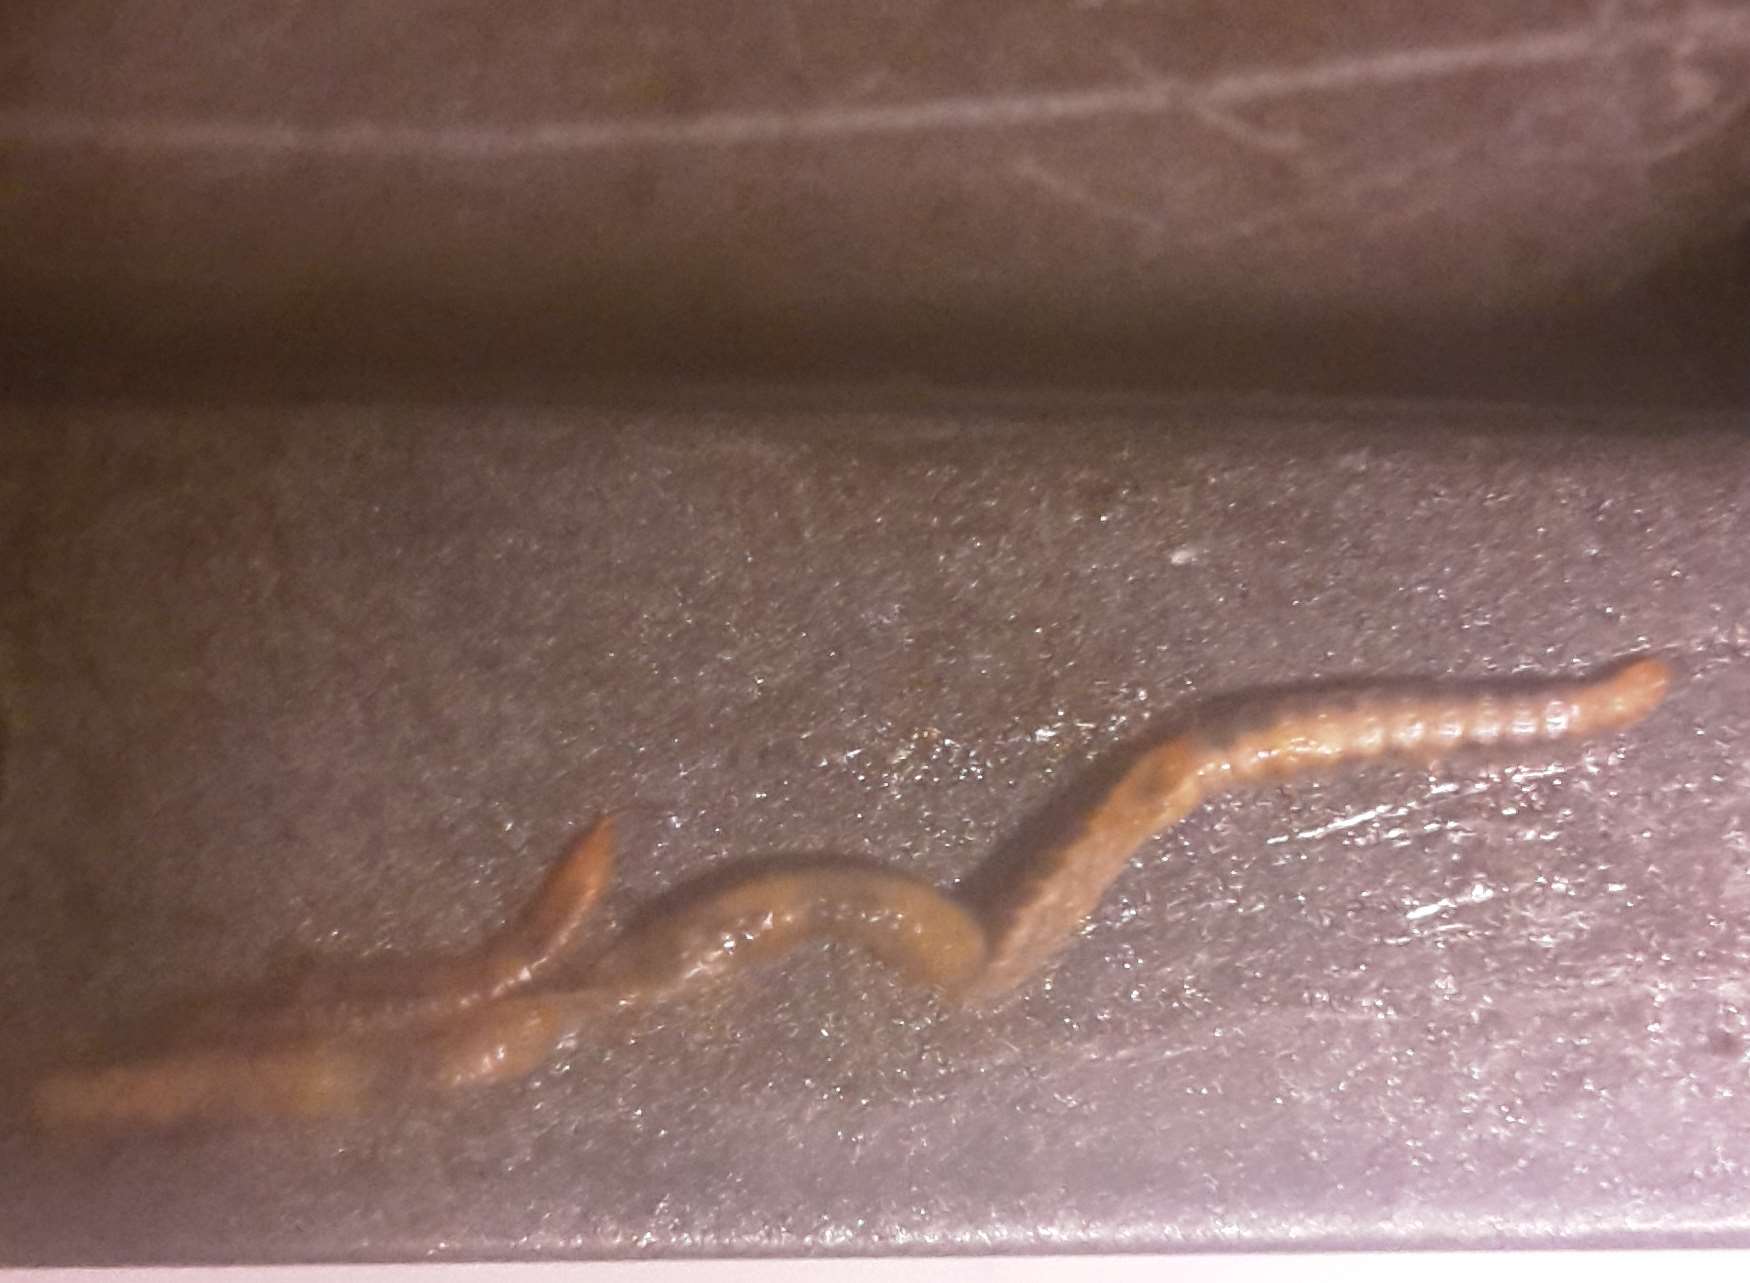 Zoe Connell found this worm in a packet of ribs she bought at Sainsbury's in Chatham